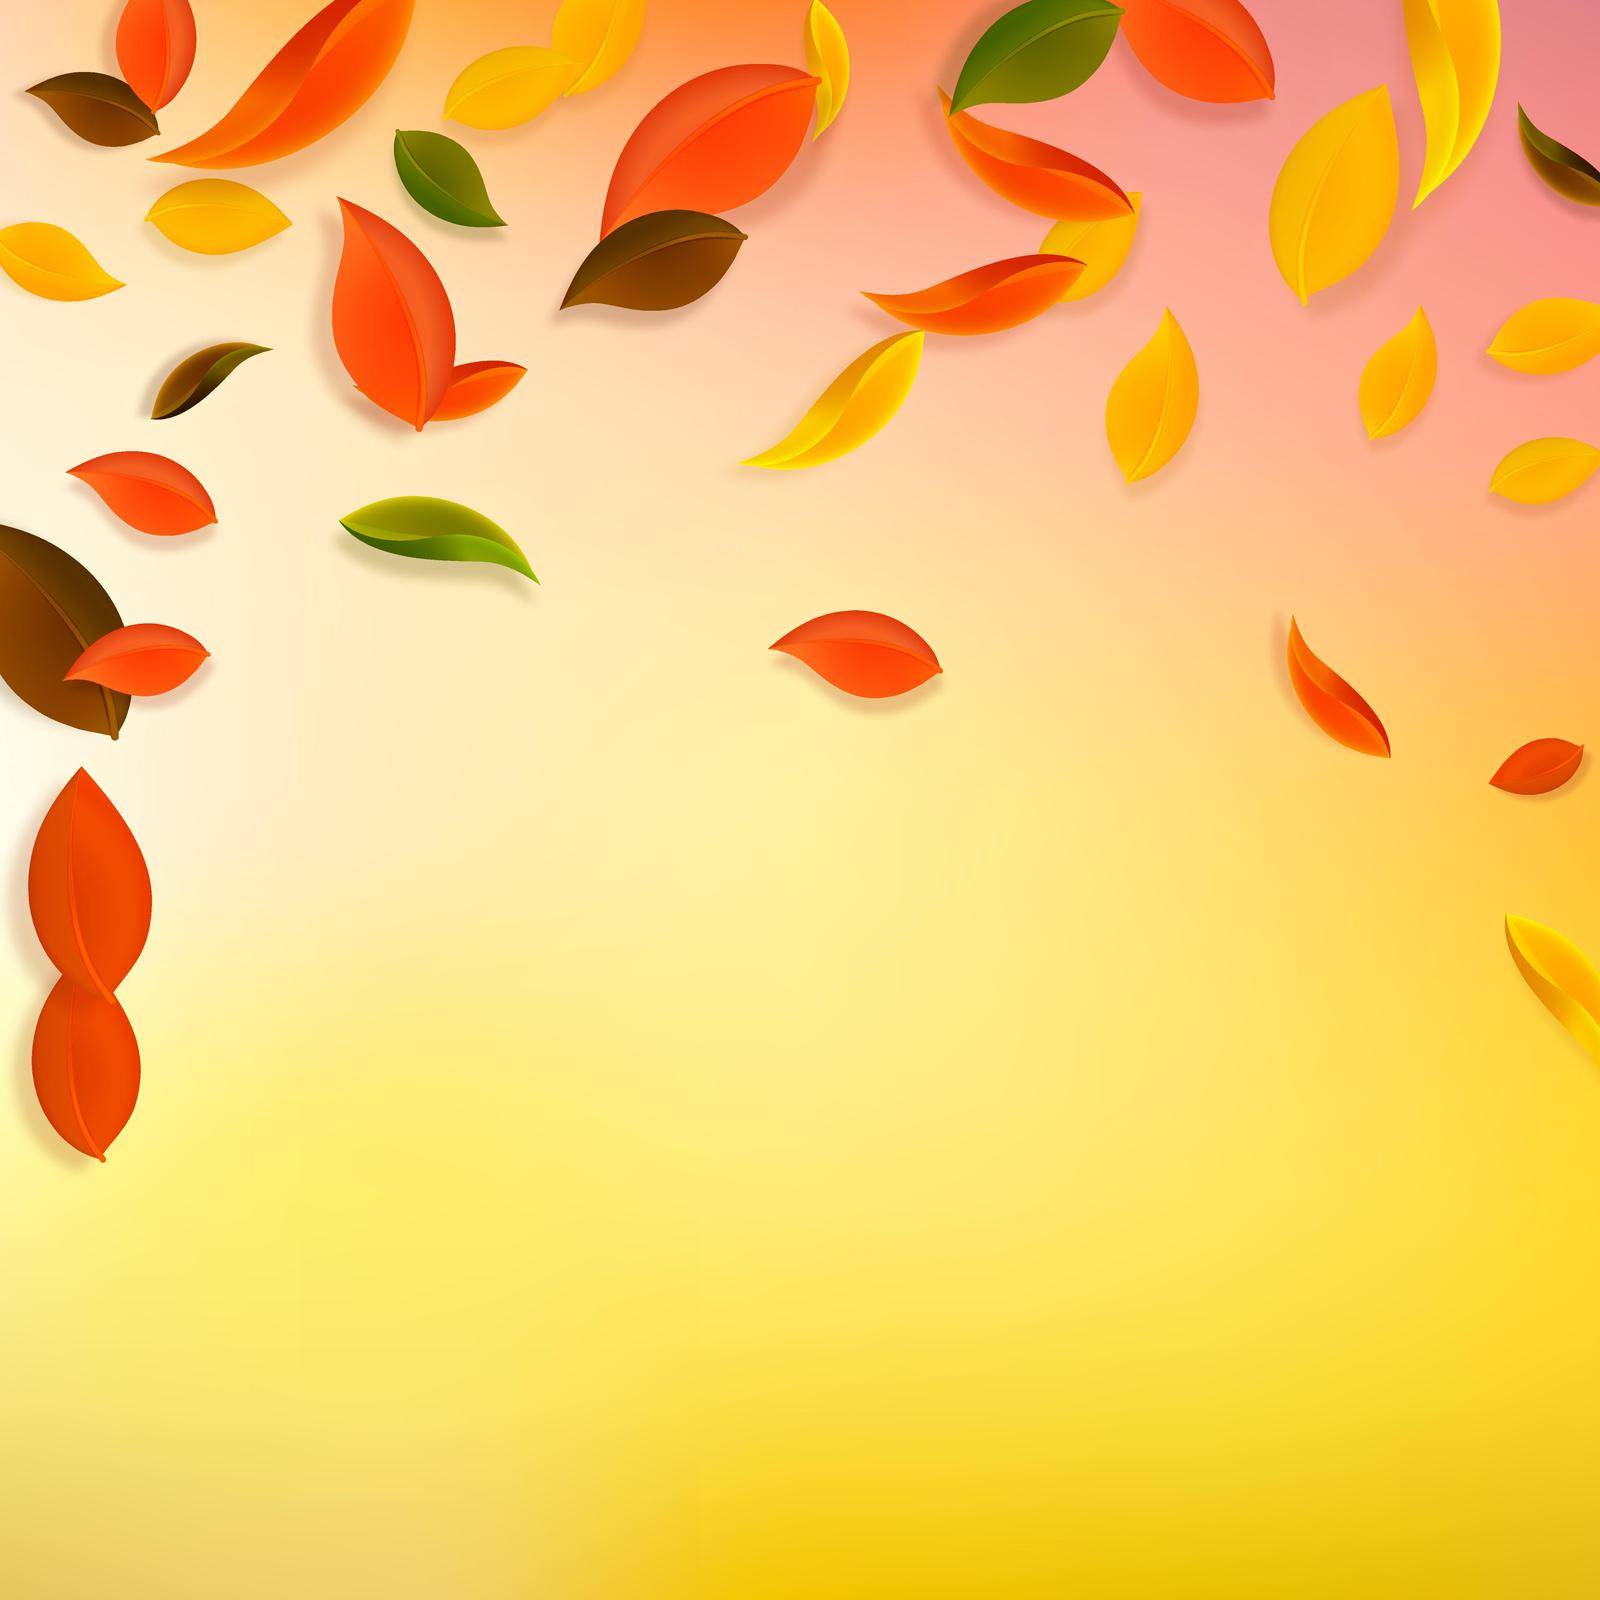 Falling autumn leaves. Red, yellow, green, brown chaotic leaves flying. Falling rain colorful foliage on good-looking white background. Authentic back to school sale.